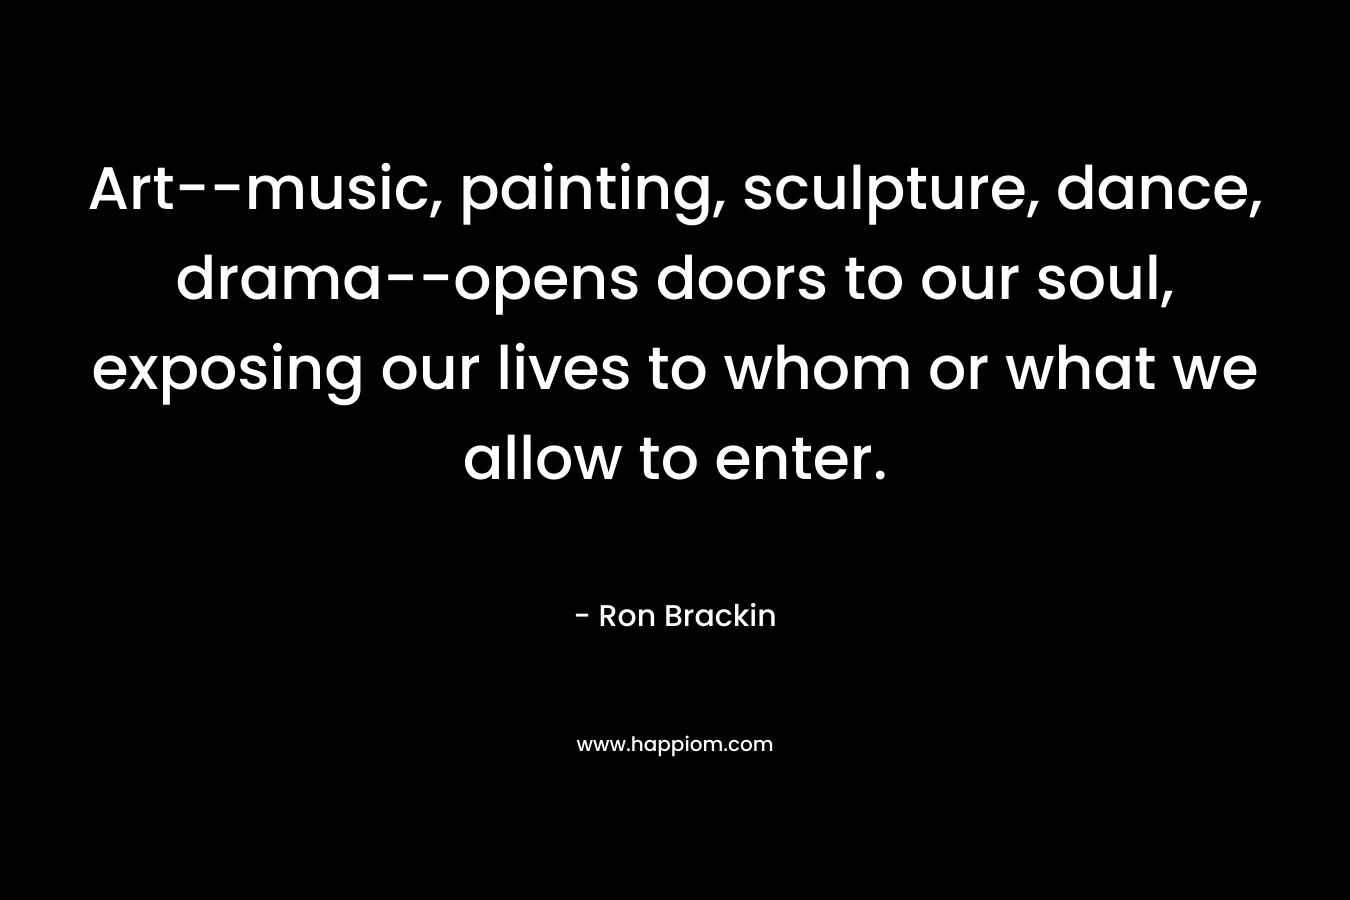 Art–music, painting, sculpture, dance, drama–opens doors to our soul, exposing our lives to whom or what we allow to enter. – Ron Brackin